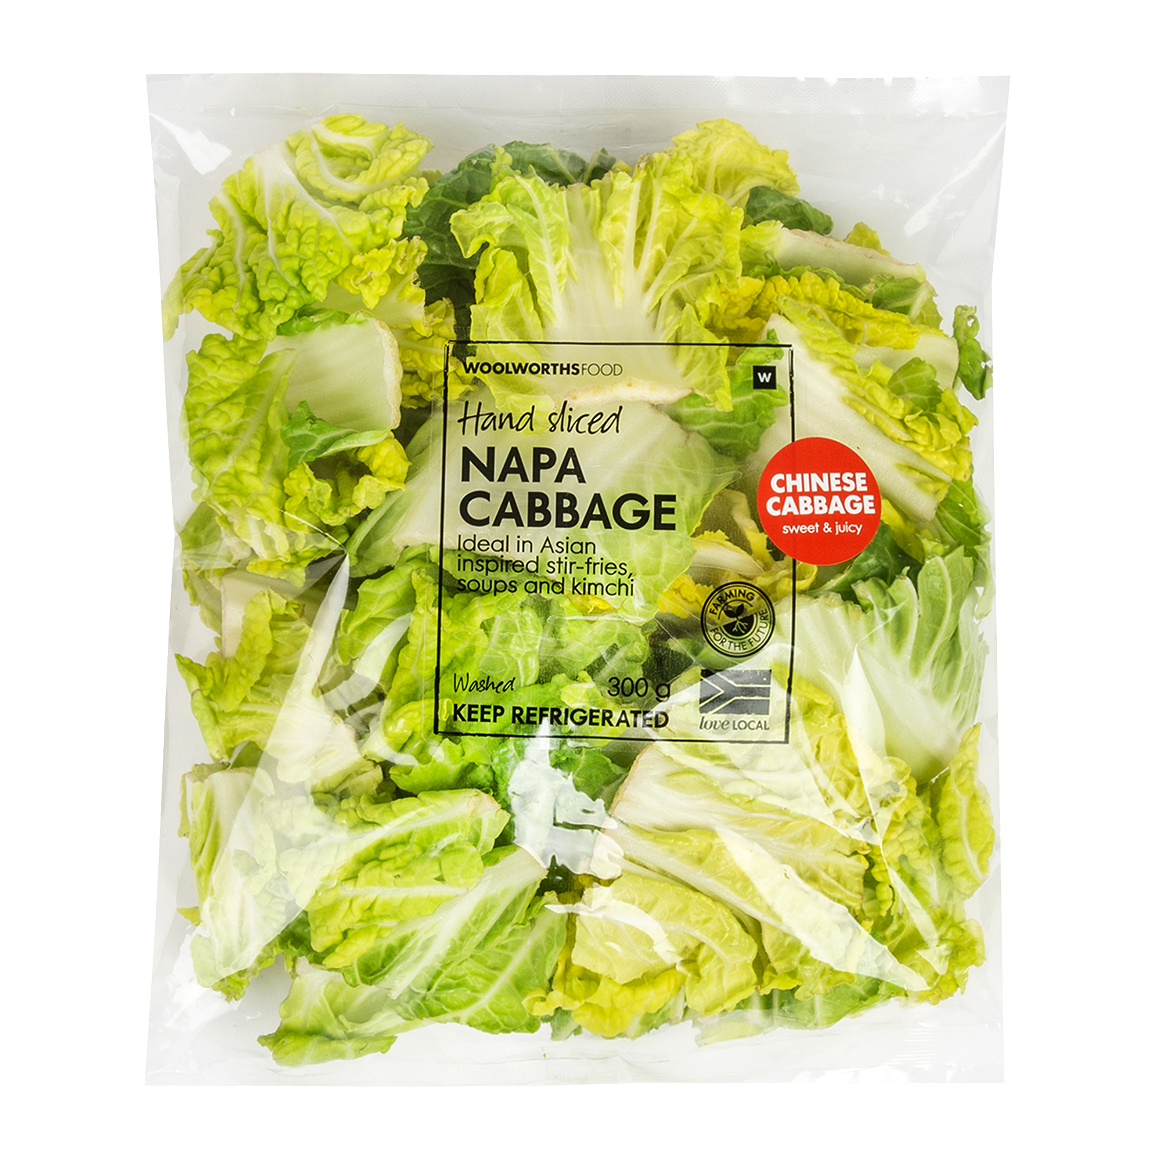 Nutritious Negligee: The Cabbage Bra is Edible Support